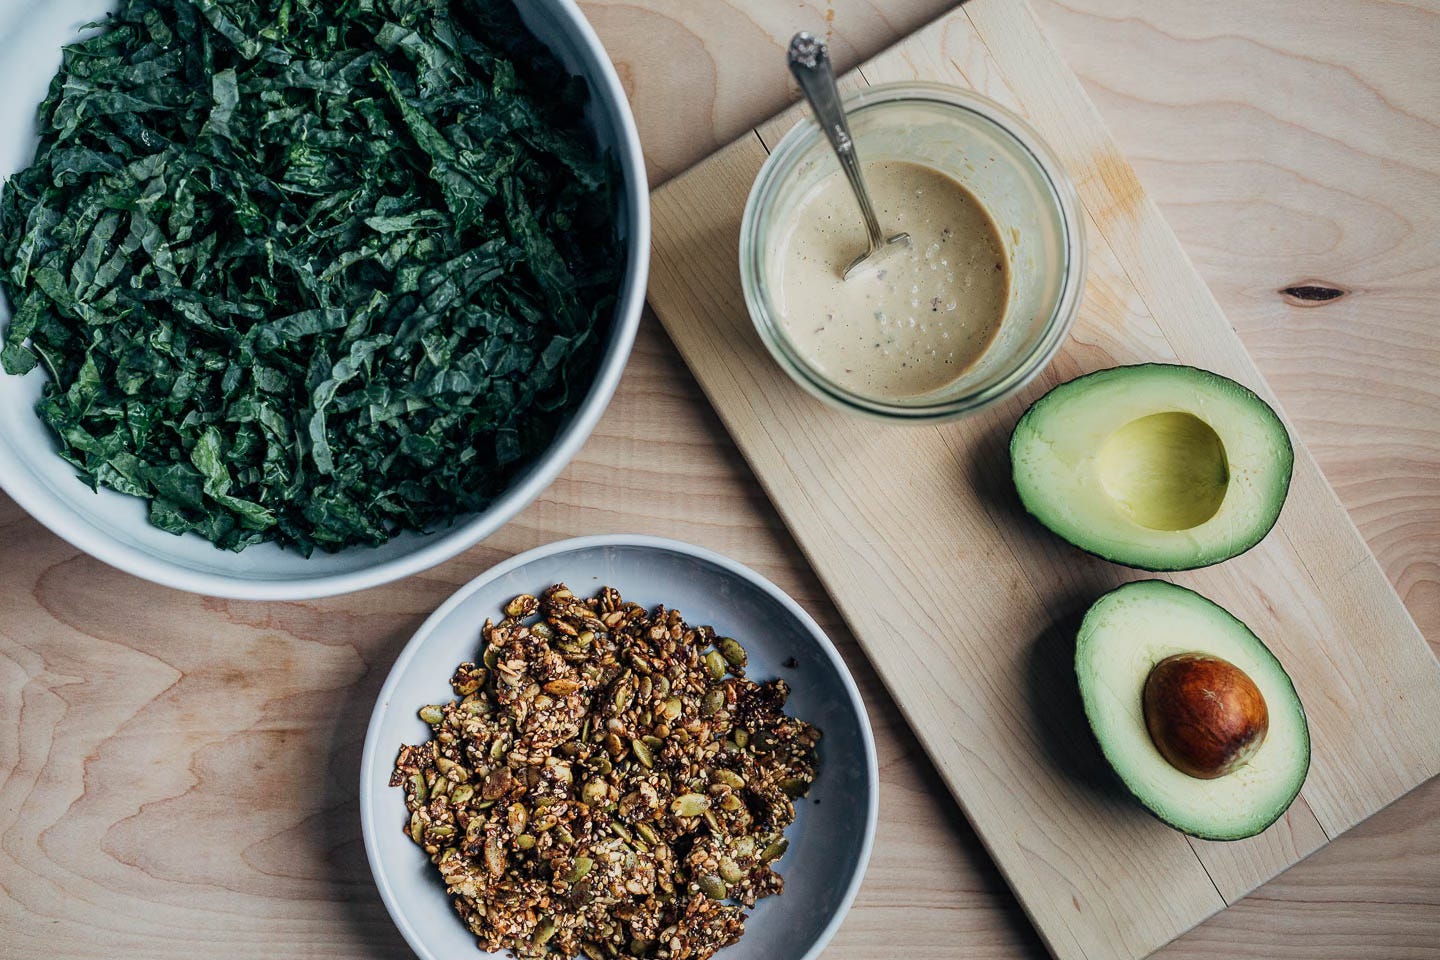 Ingredients laid out: kale in a bowl, dressing and an avocado, and a bowl of seed clusters